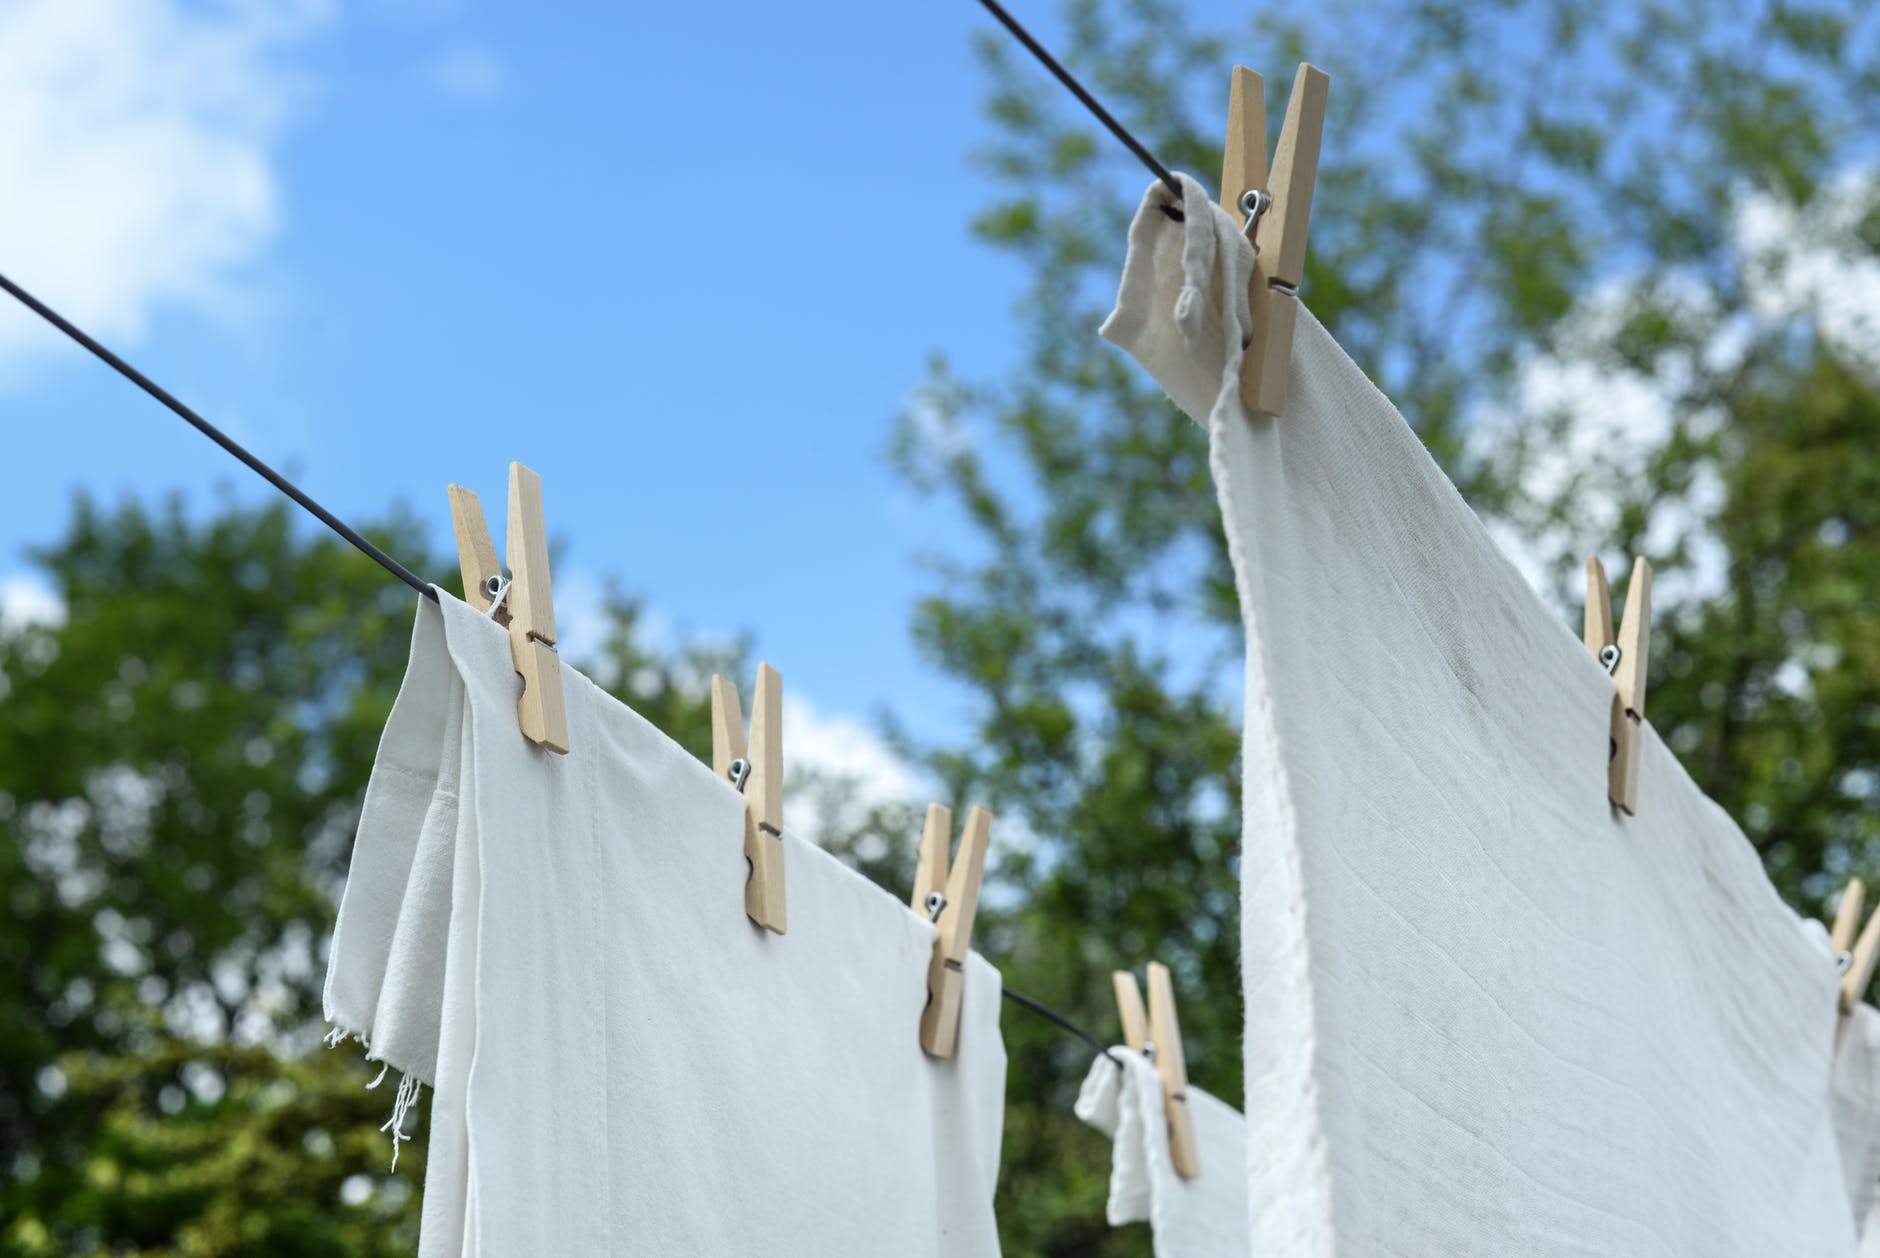 Wash your clothes regularly at 60°c to help kill bacteria and viruses!